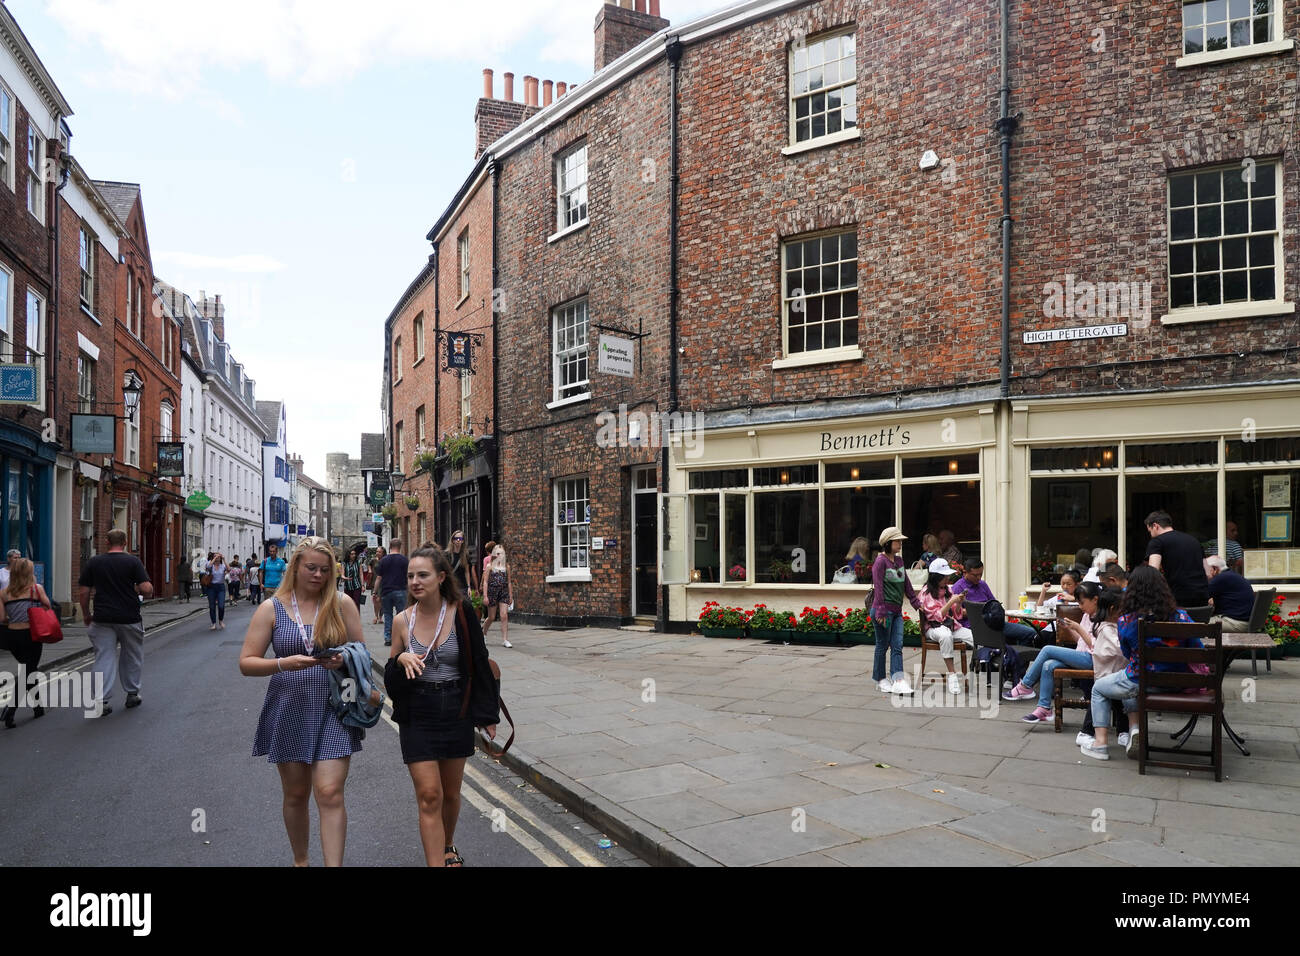 Views of York in Yorkshire, England. Photo date: Friday, August 3, 2018. Photo: Roger Garfield/Alamy Stock Photo